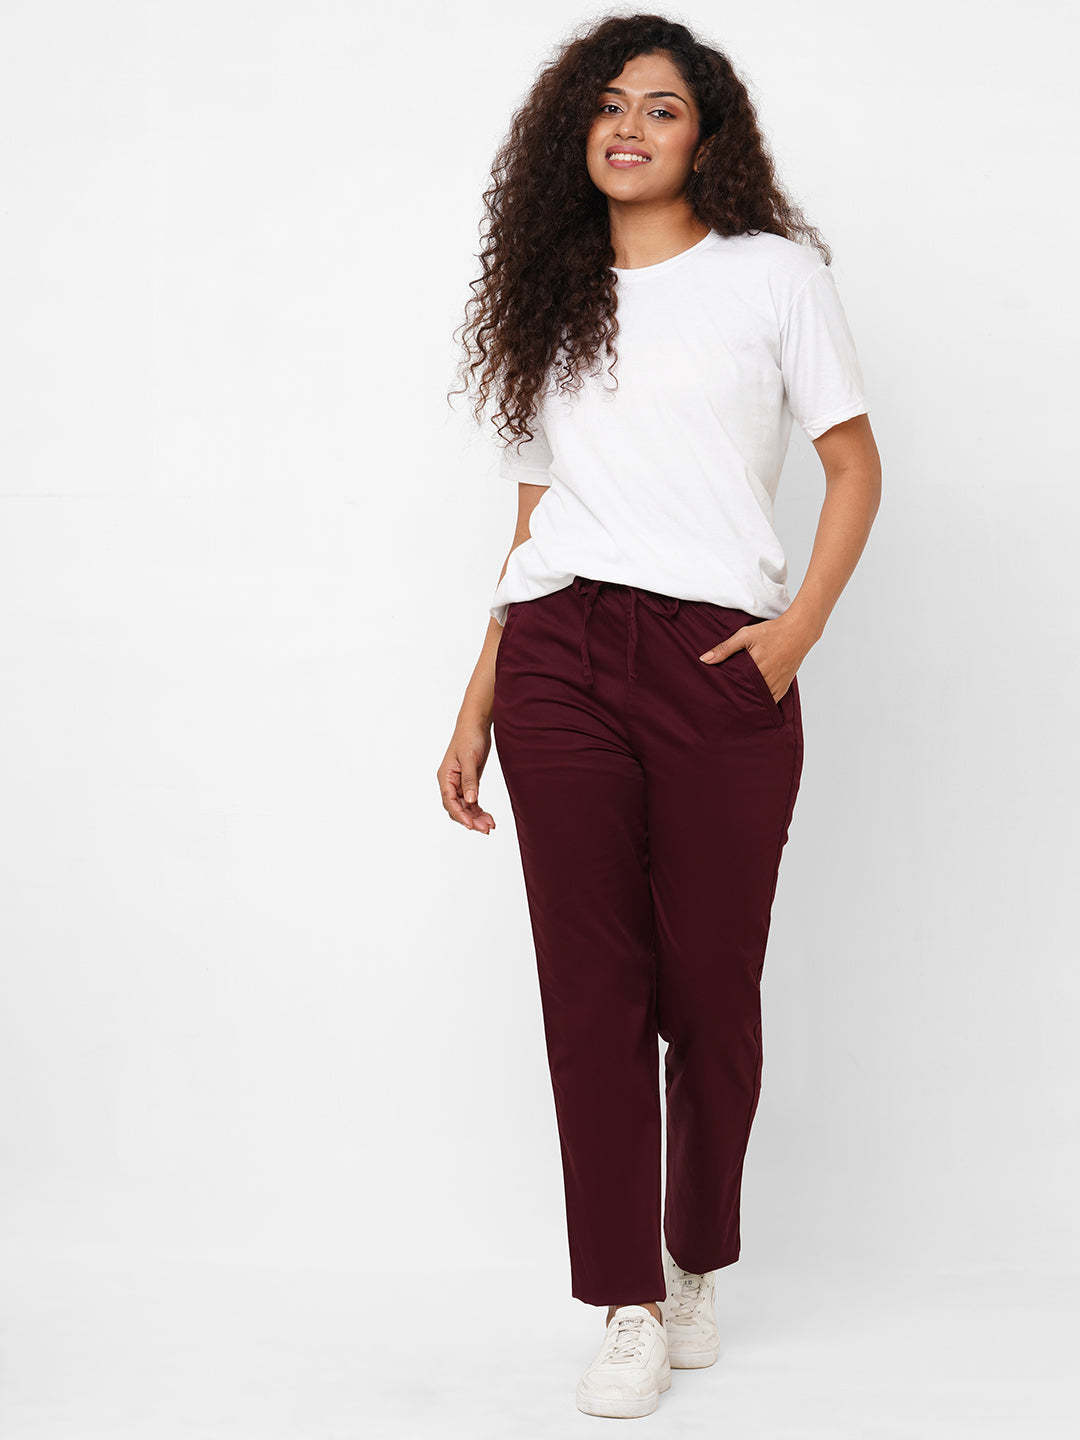 Buy Awesome KC30 Indigo Top With Maroon Pants Online | Kessa